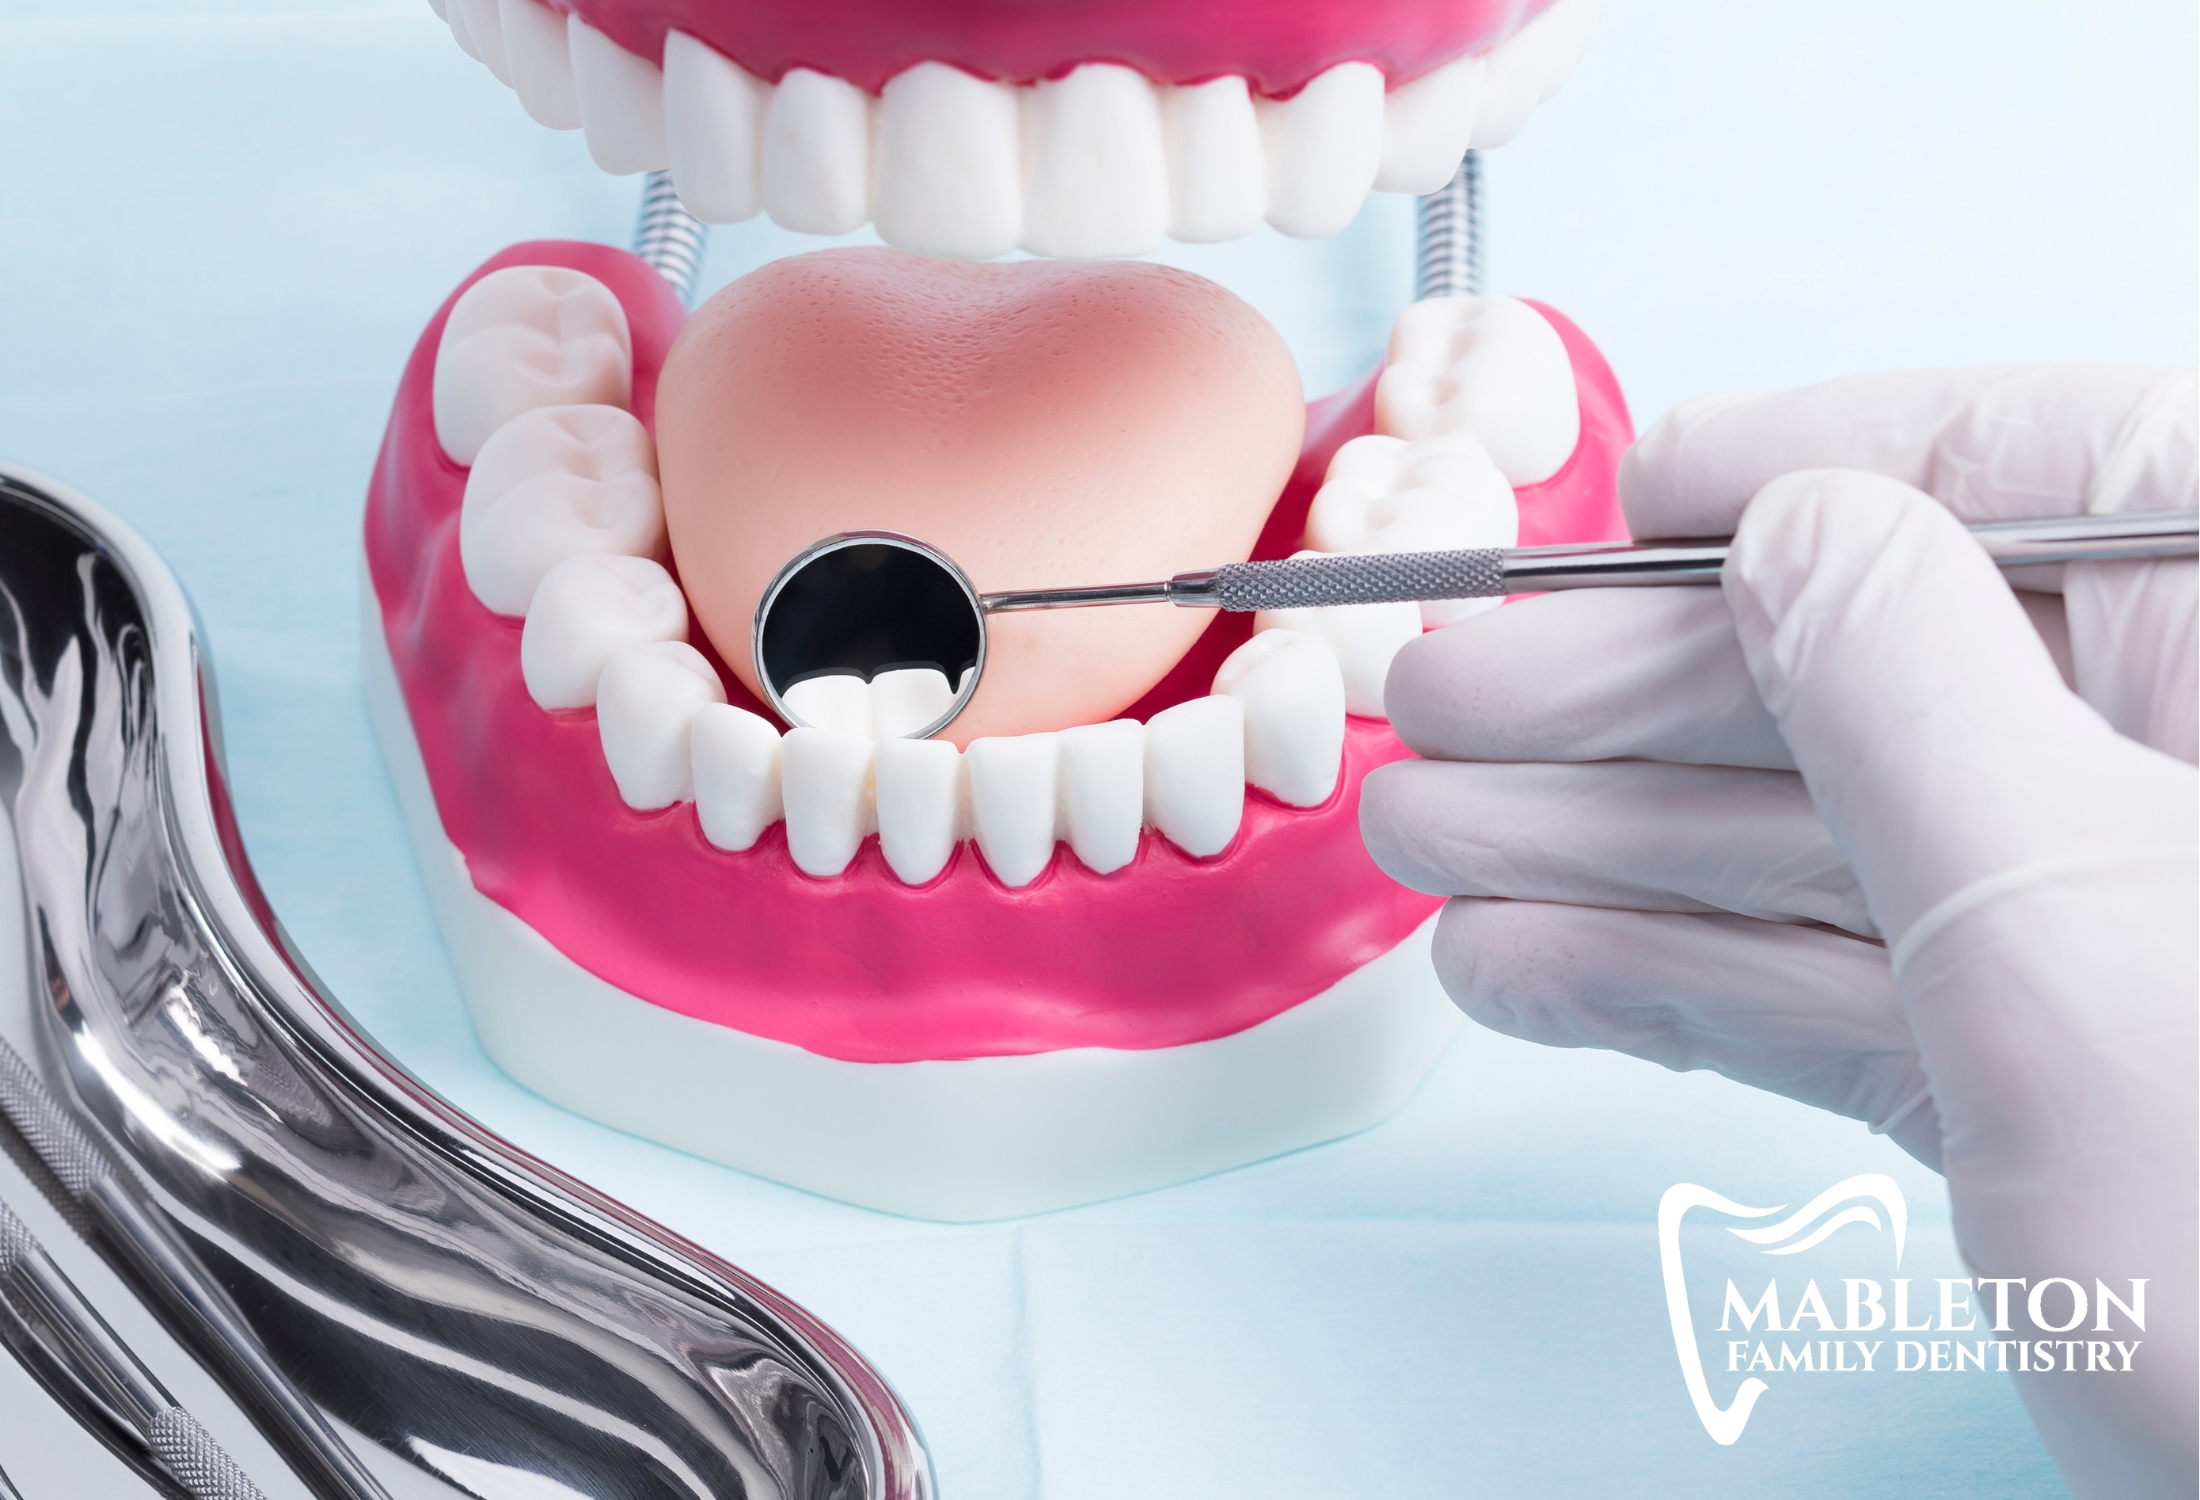 Why Mableton Family Dentistry Is the Best Choice for Your Dental Care